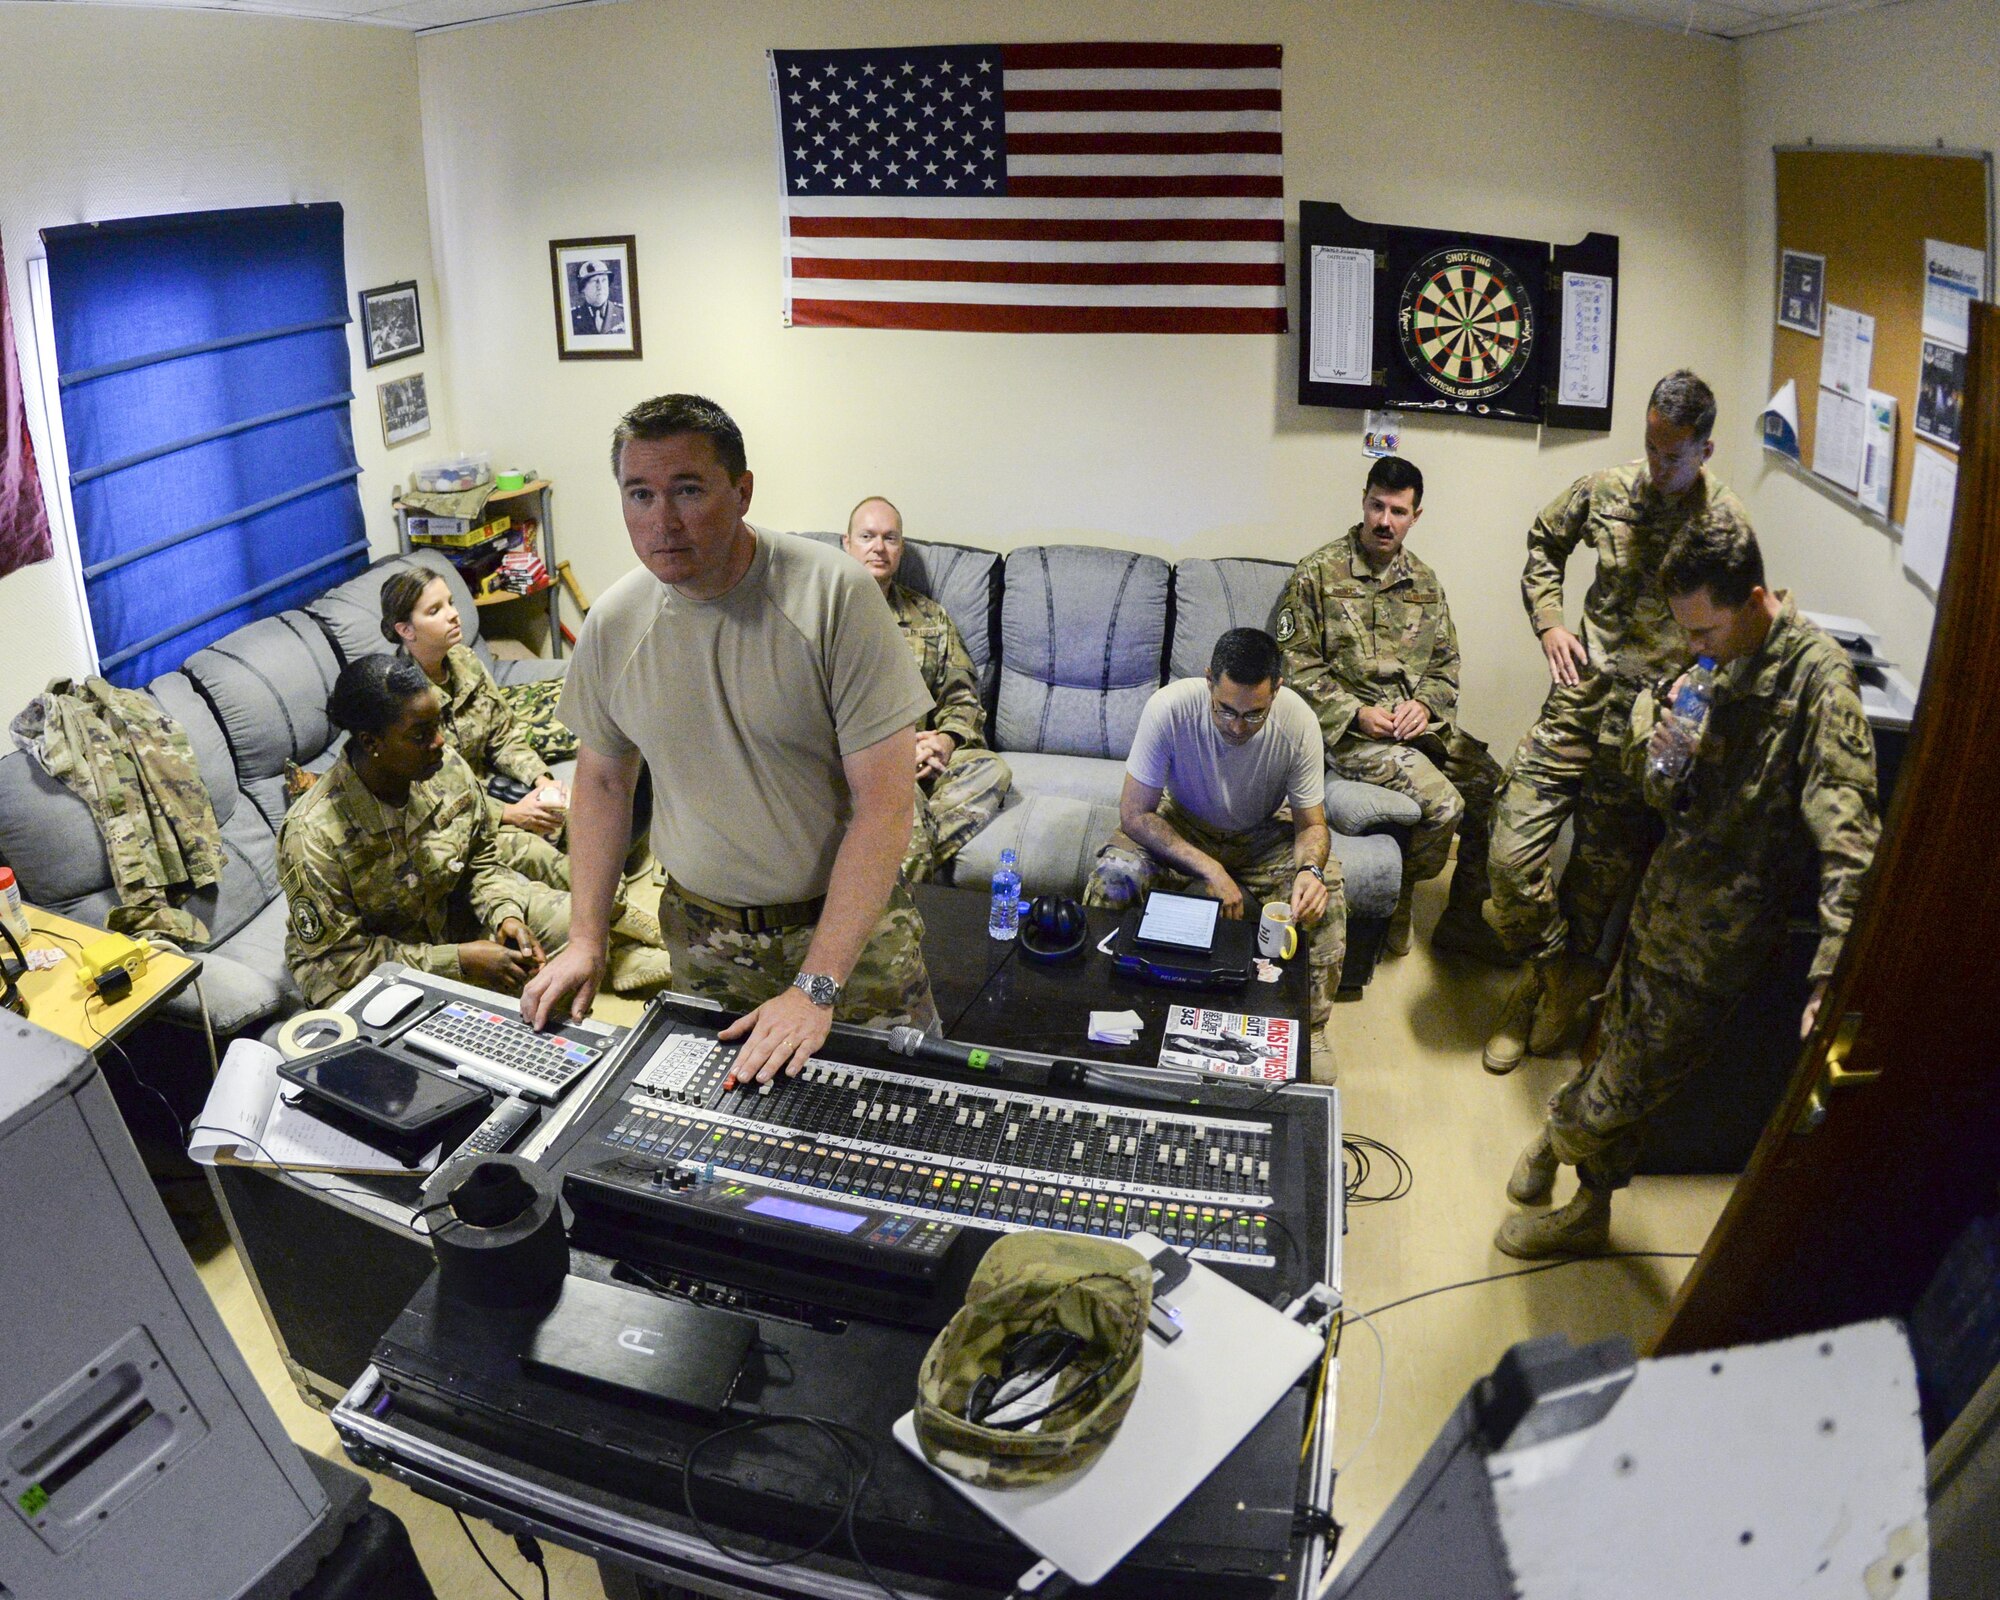 Members of the U.S. Air Force Central Command Band, Touch-n-Go, gathered behind U.S. Air Force Tech. Sgt. John Marsh, foreground, audio engineer, as they listen to a recording they recently cut of the Air Force Song at Al Udeid, Air Force Base, Qatar, Sept. 21, 2017.